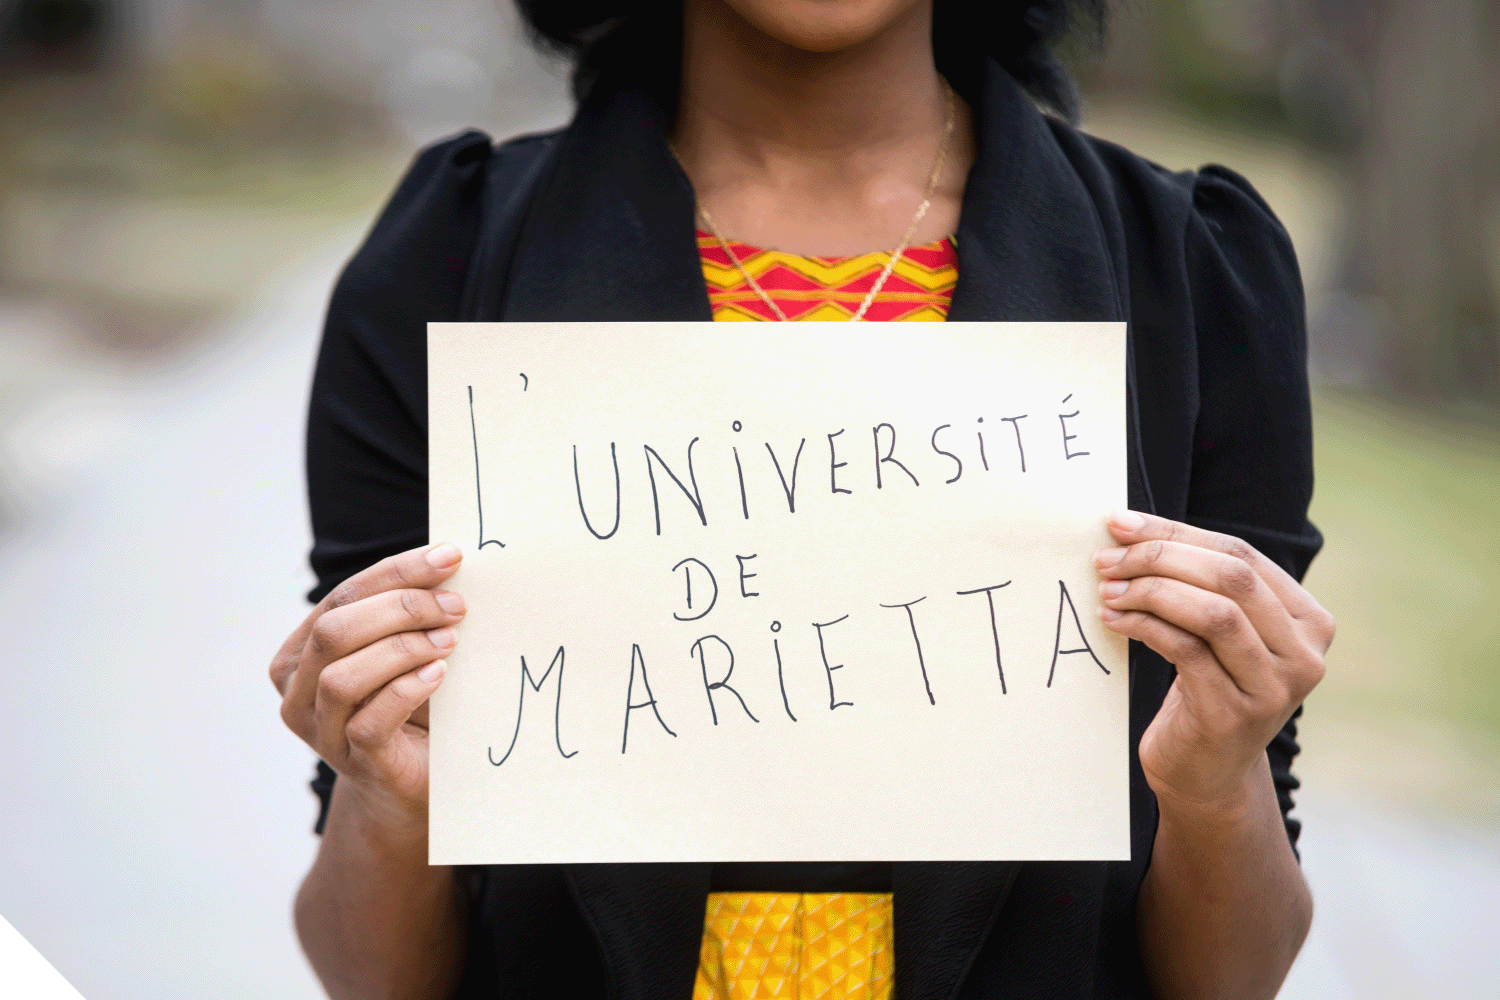 A Marietta College student holding a sign